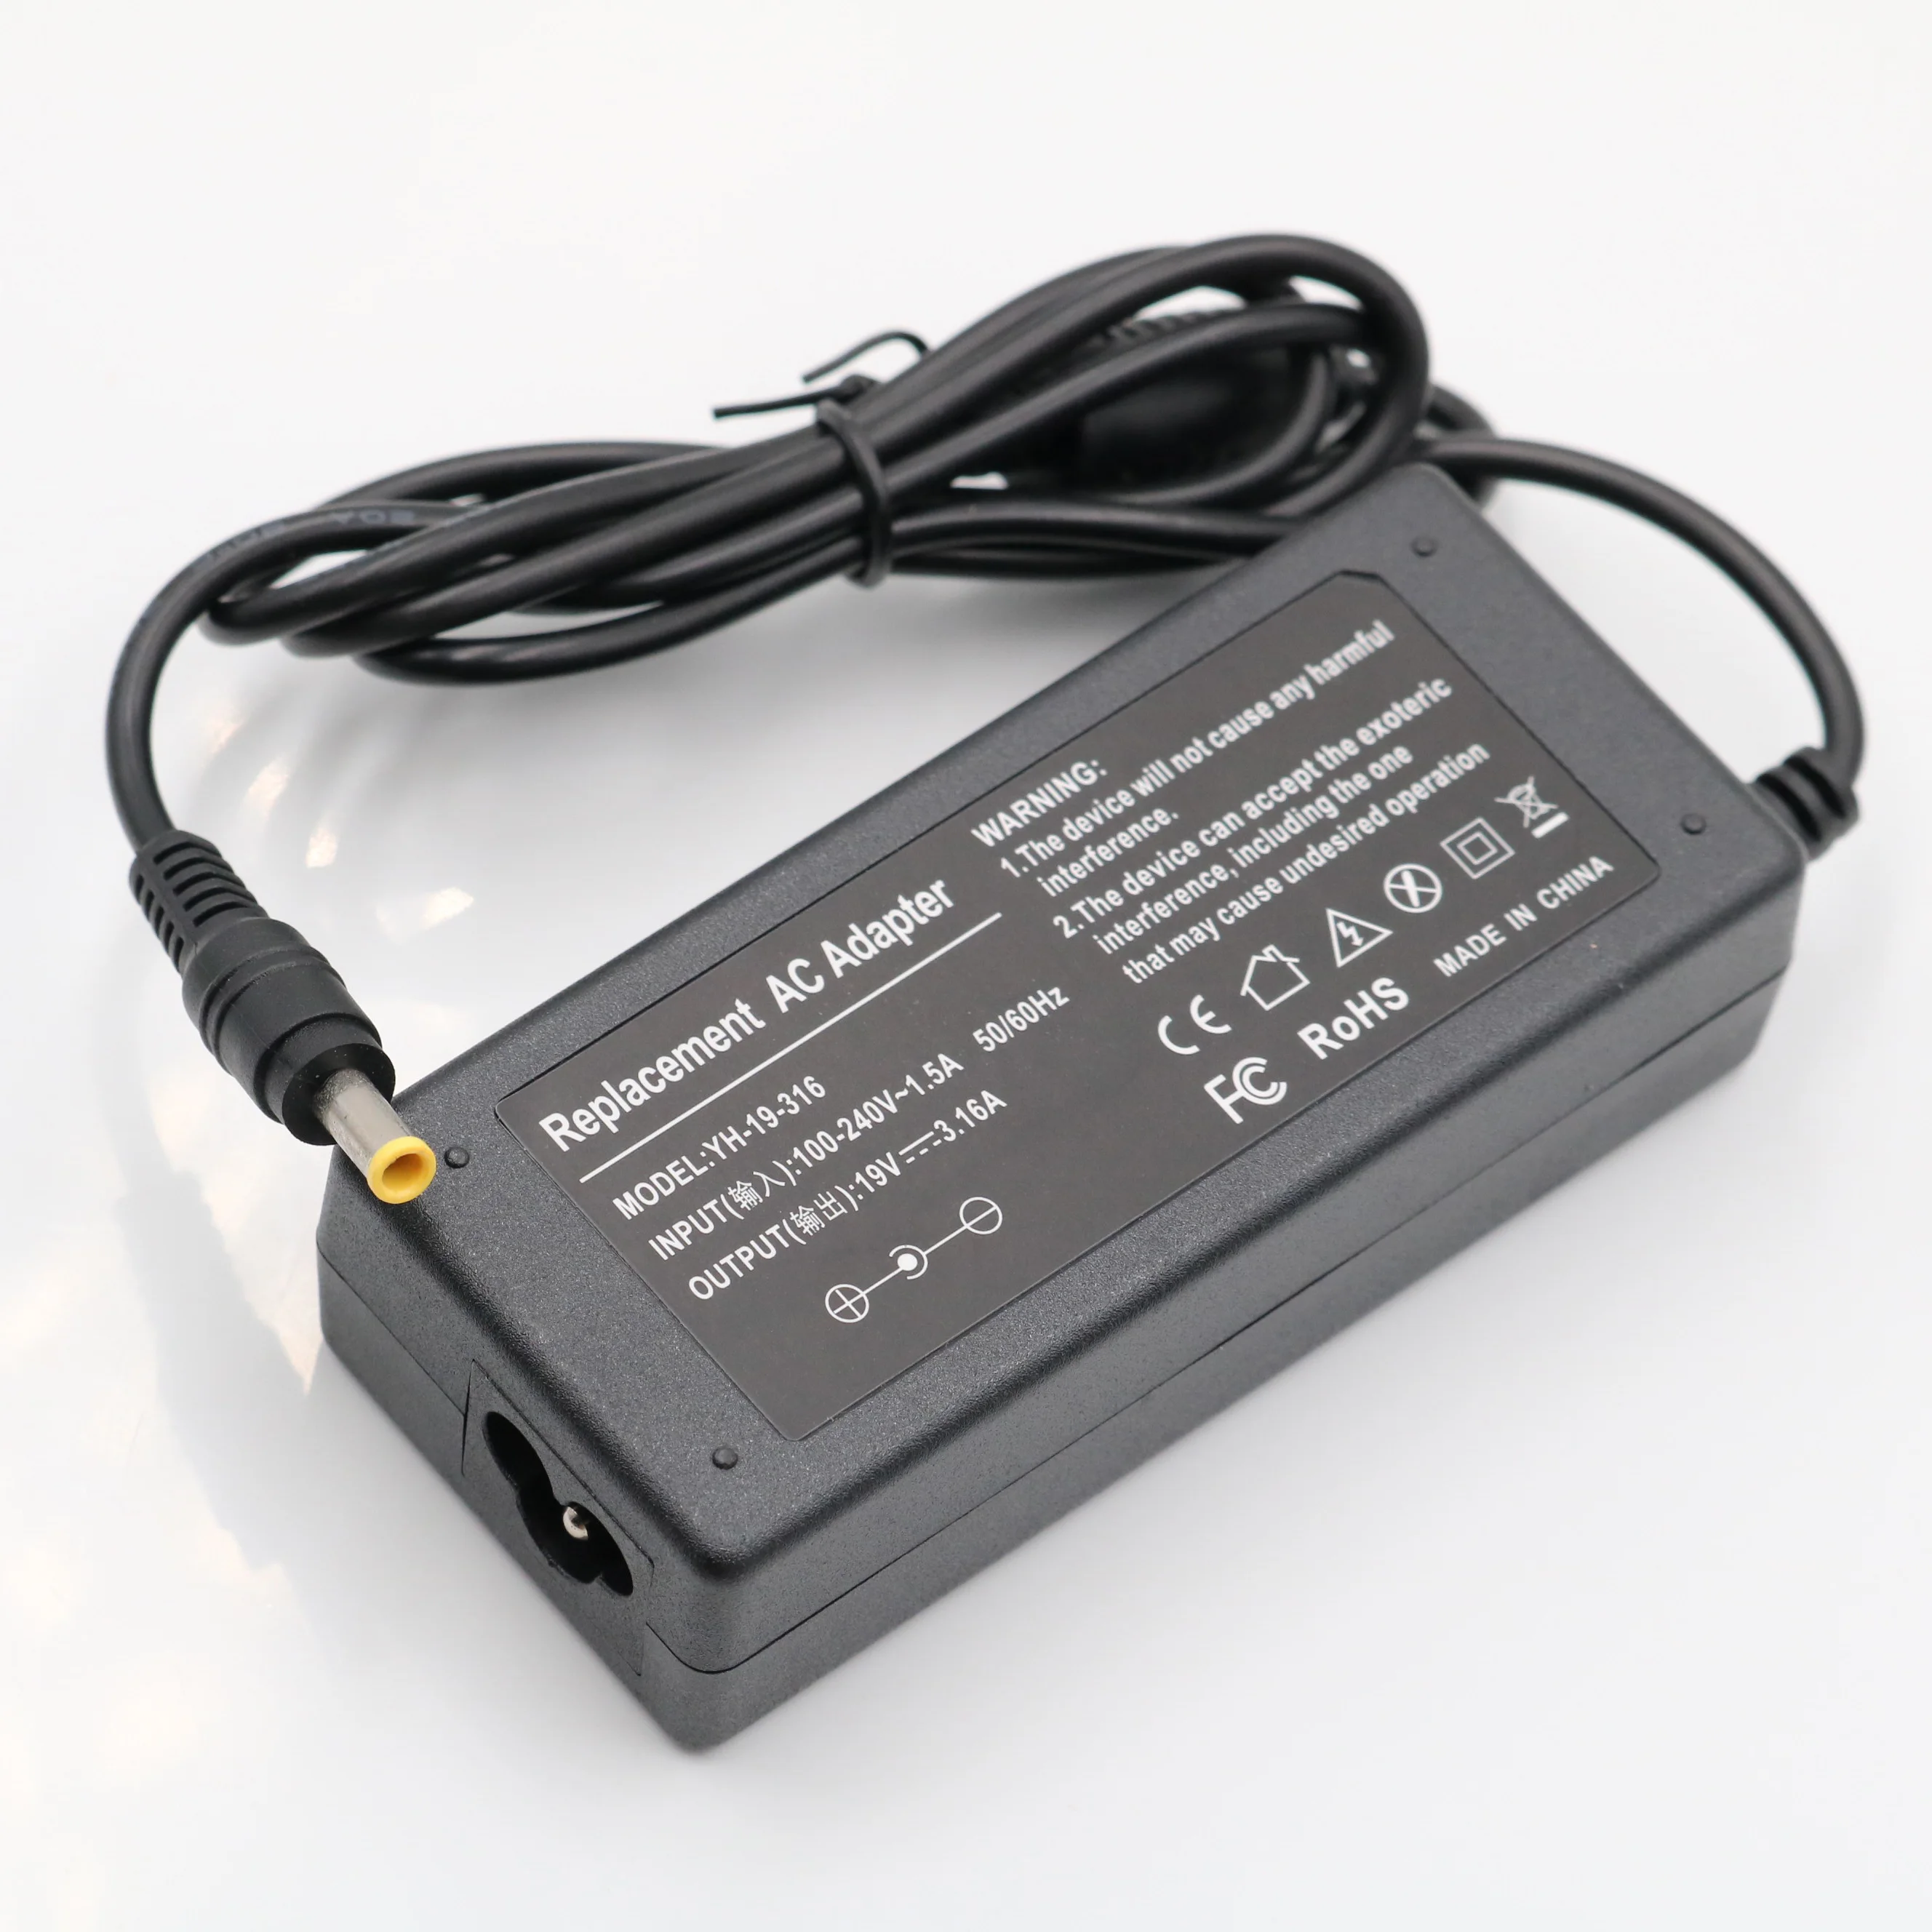 

19V 3.16A 5.5*3.0mm Power AC Adapter Supply for Samsung AD-6019R AD-6019 CPA09-004A ADP-60ZH D PA-1600-66 ADP-60ZH A charger